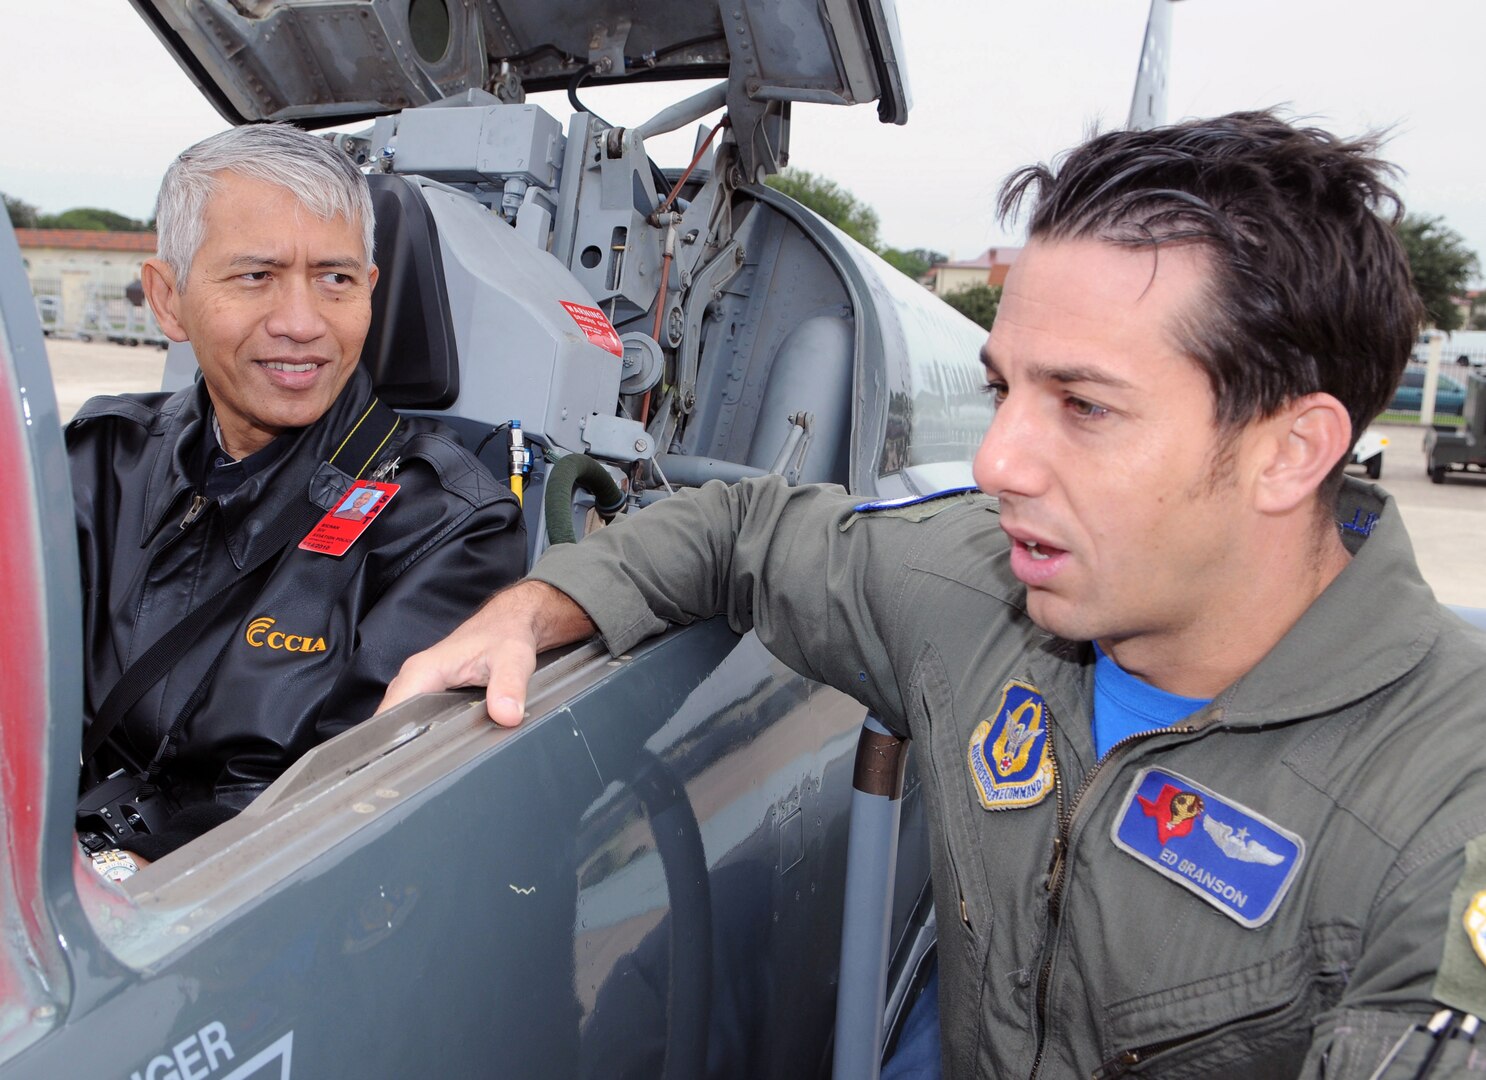 Sichan Siv, a former pilot with the Cambodian Air Force and former U.S. Ambasador to the United Nations, gets a first hand look at the T-38 while Maj. Ed Branson, 39th Flying Ttraining Squadron explaines several of the avionic systems on the T-38.  (U.S. Air Force Photo By Don Lindsey)